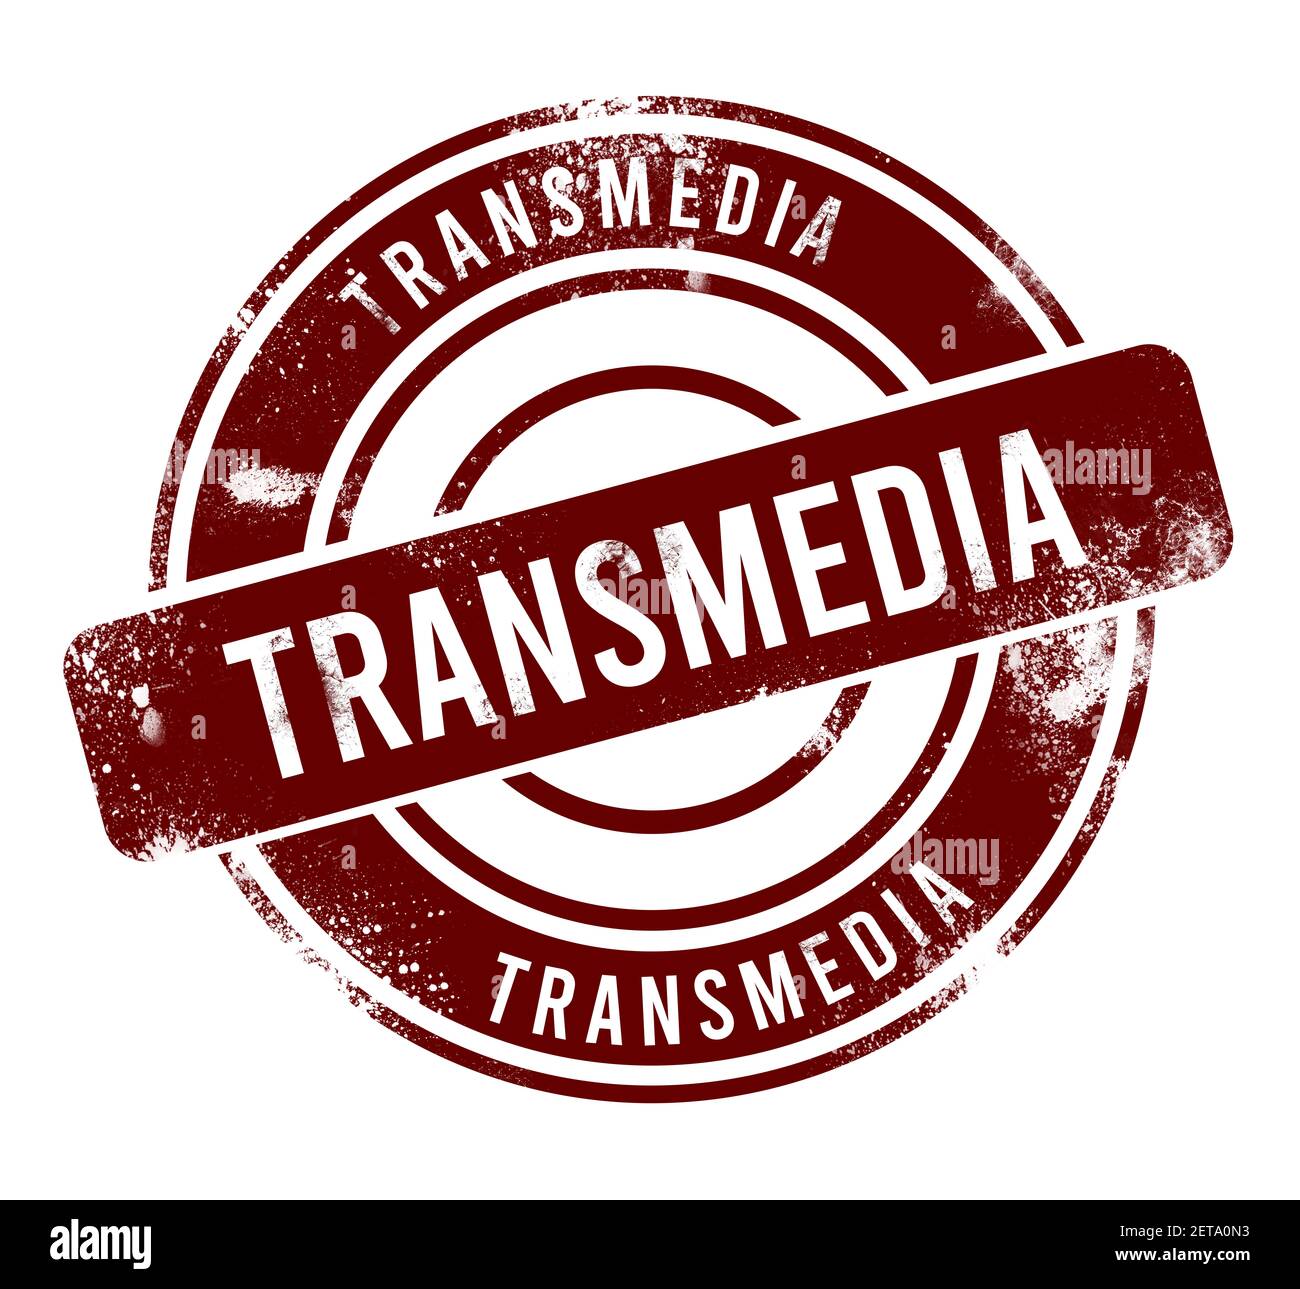 Transmedia - red round grunge button, stamp Stock Photo